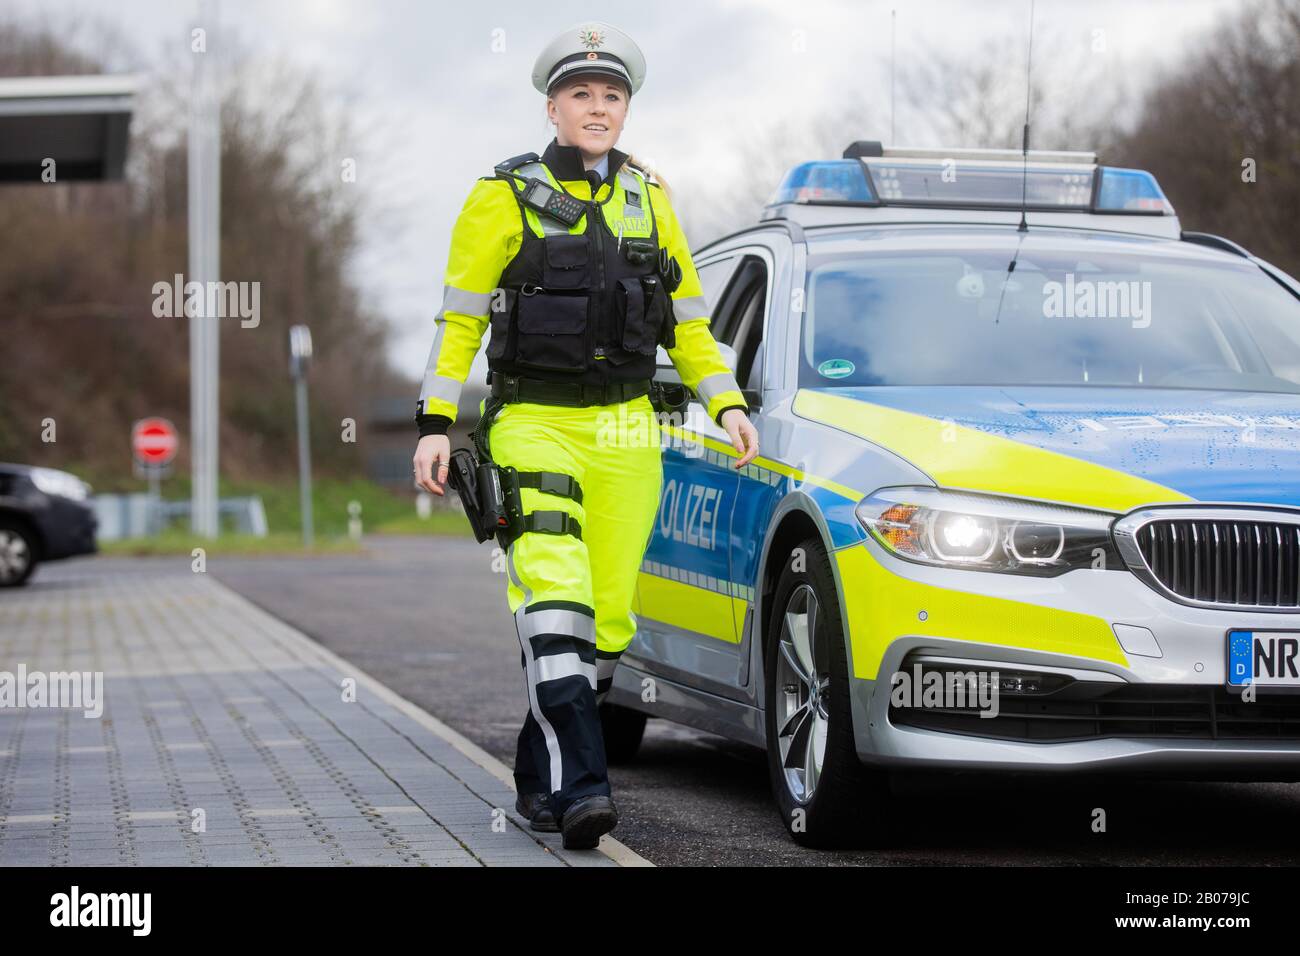 19 February 2020, North Rhine-Westphalia, Mönchengladbach: Police officer  Pia Caspers presents the new uniforms in signal colors for the highway  patrol. Around 1300 police officers are deployed on the motorways. The new